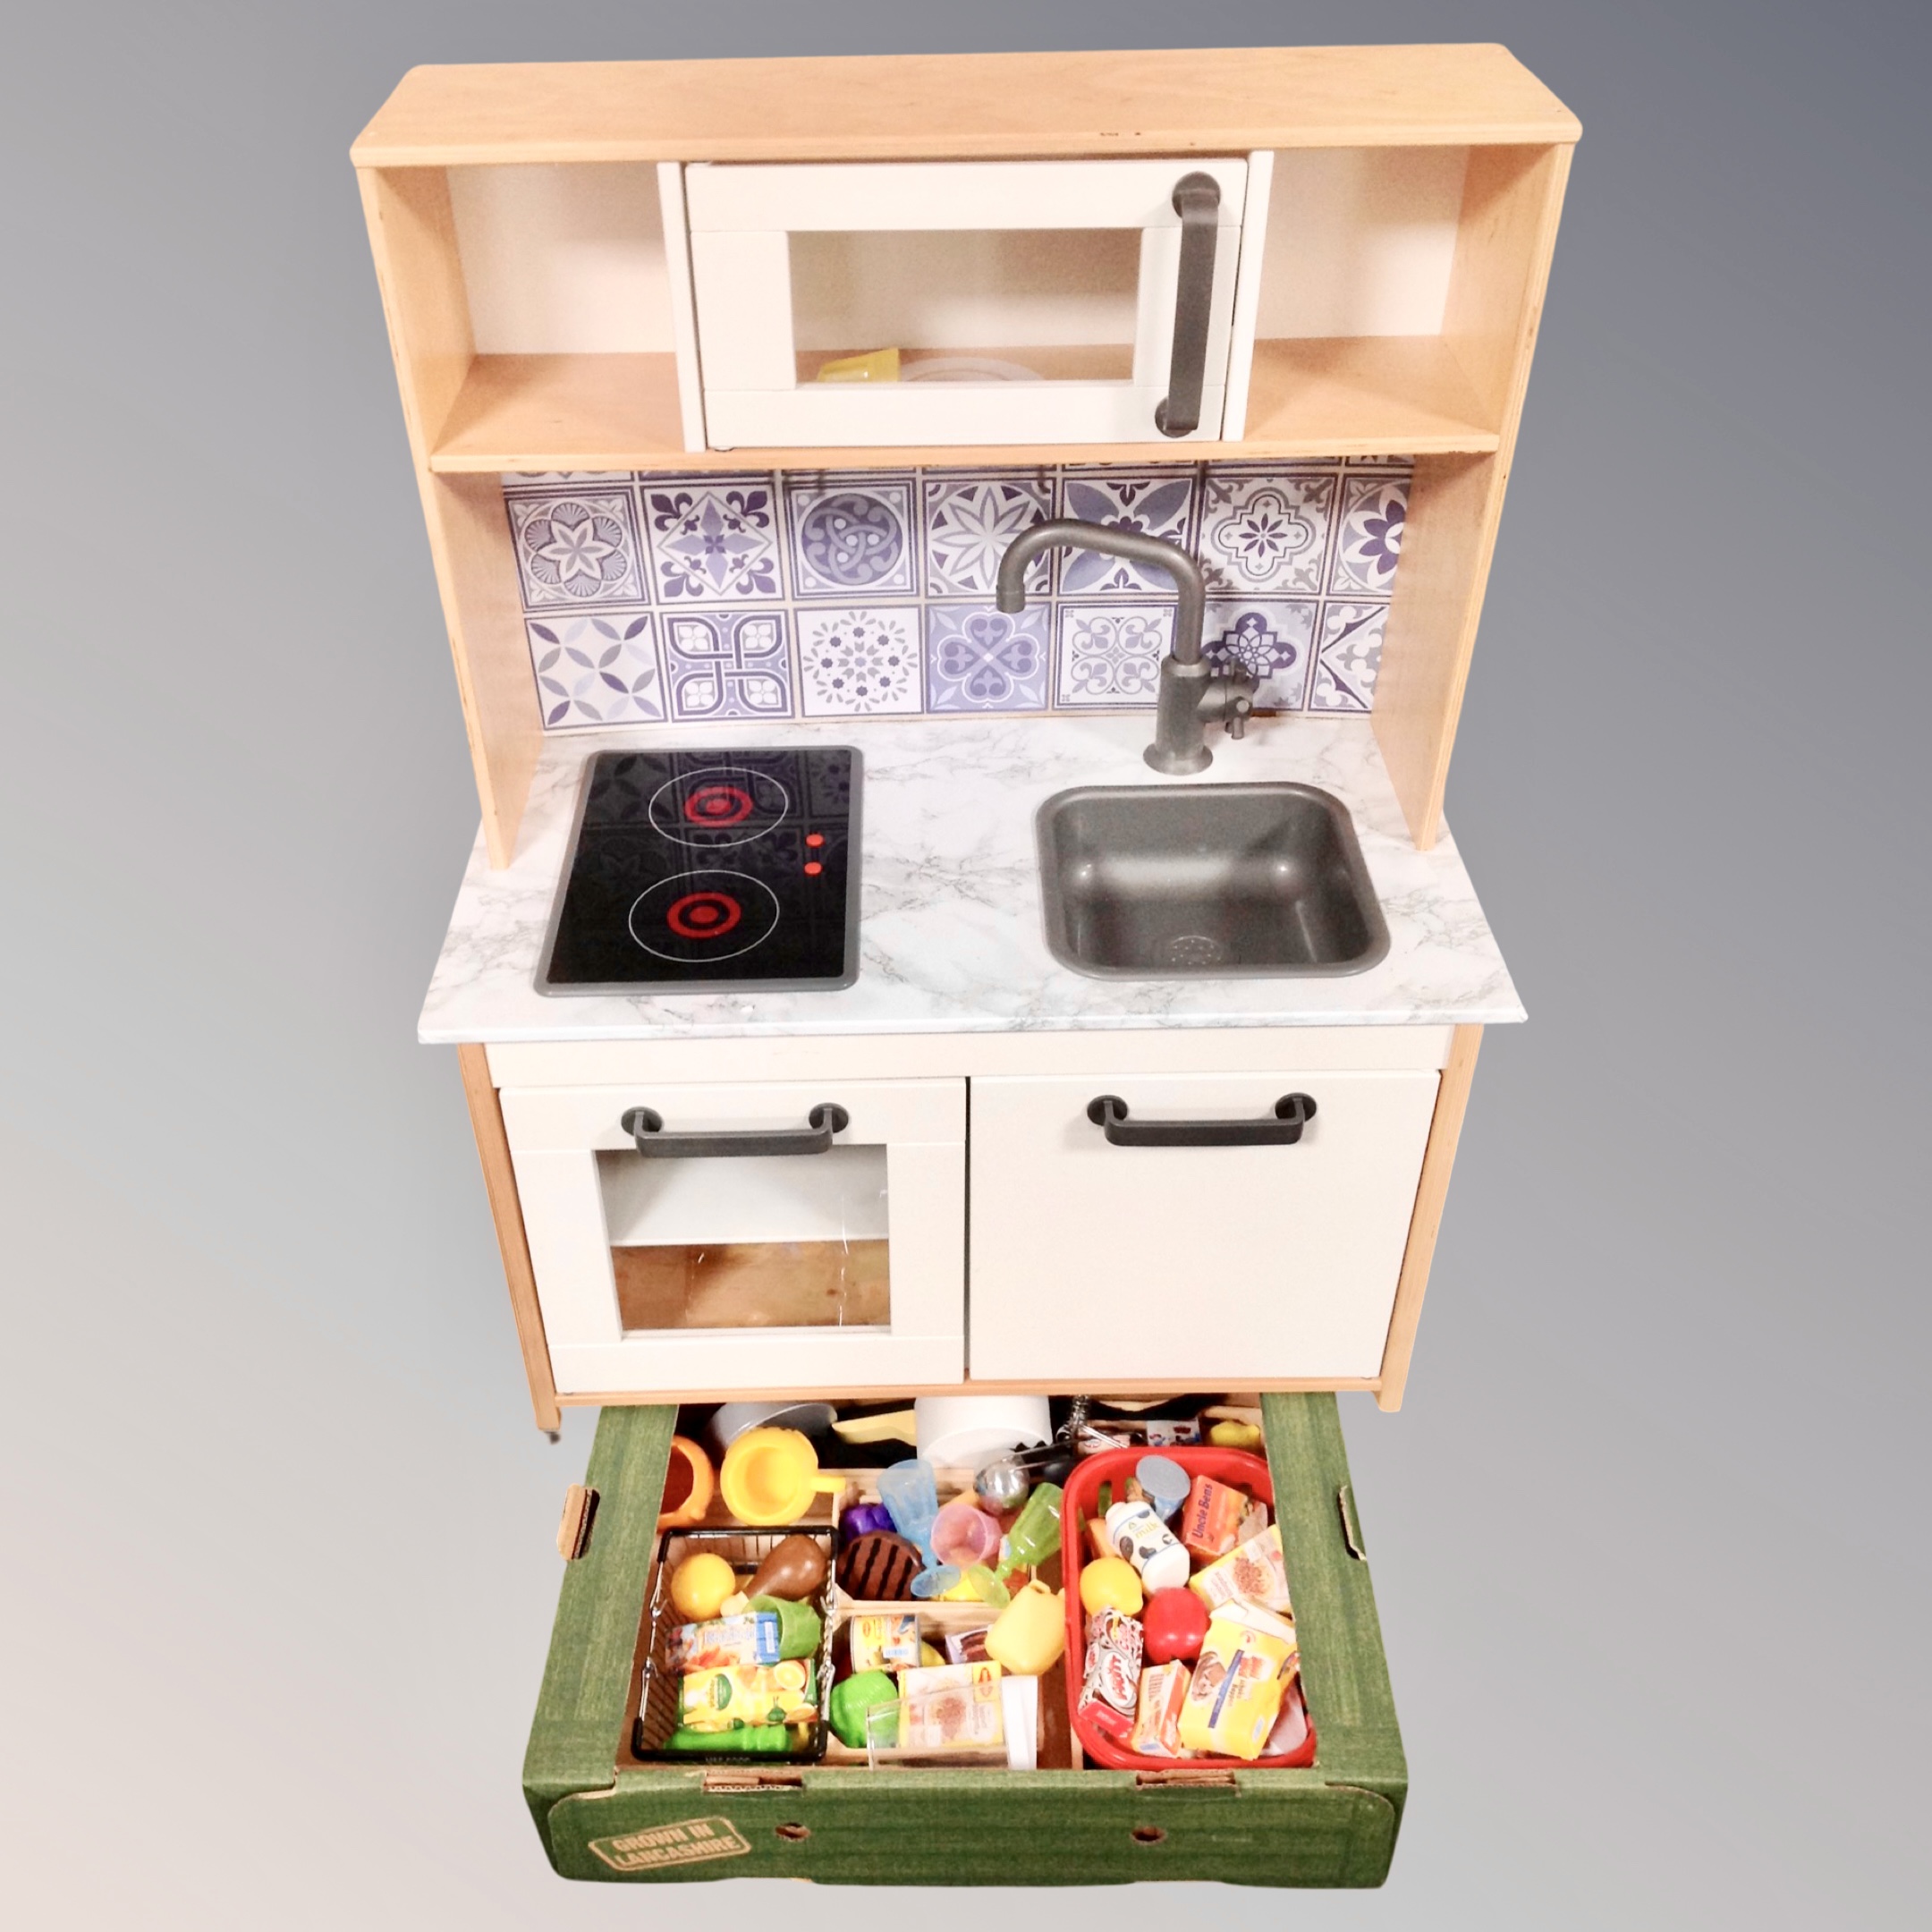 An IKEA play kitchen together with a box containing accessories.